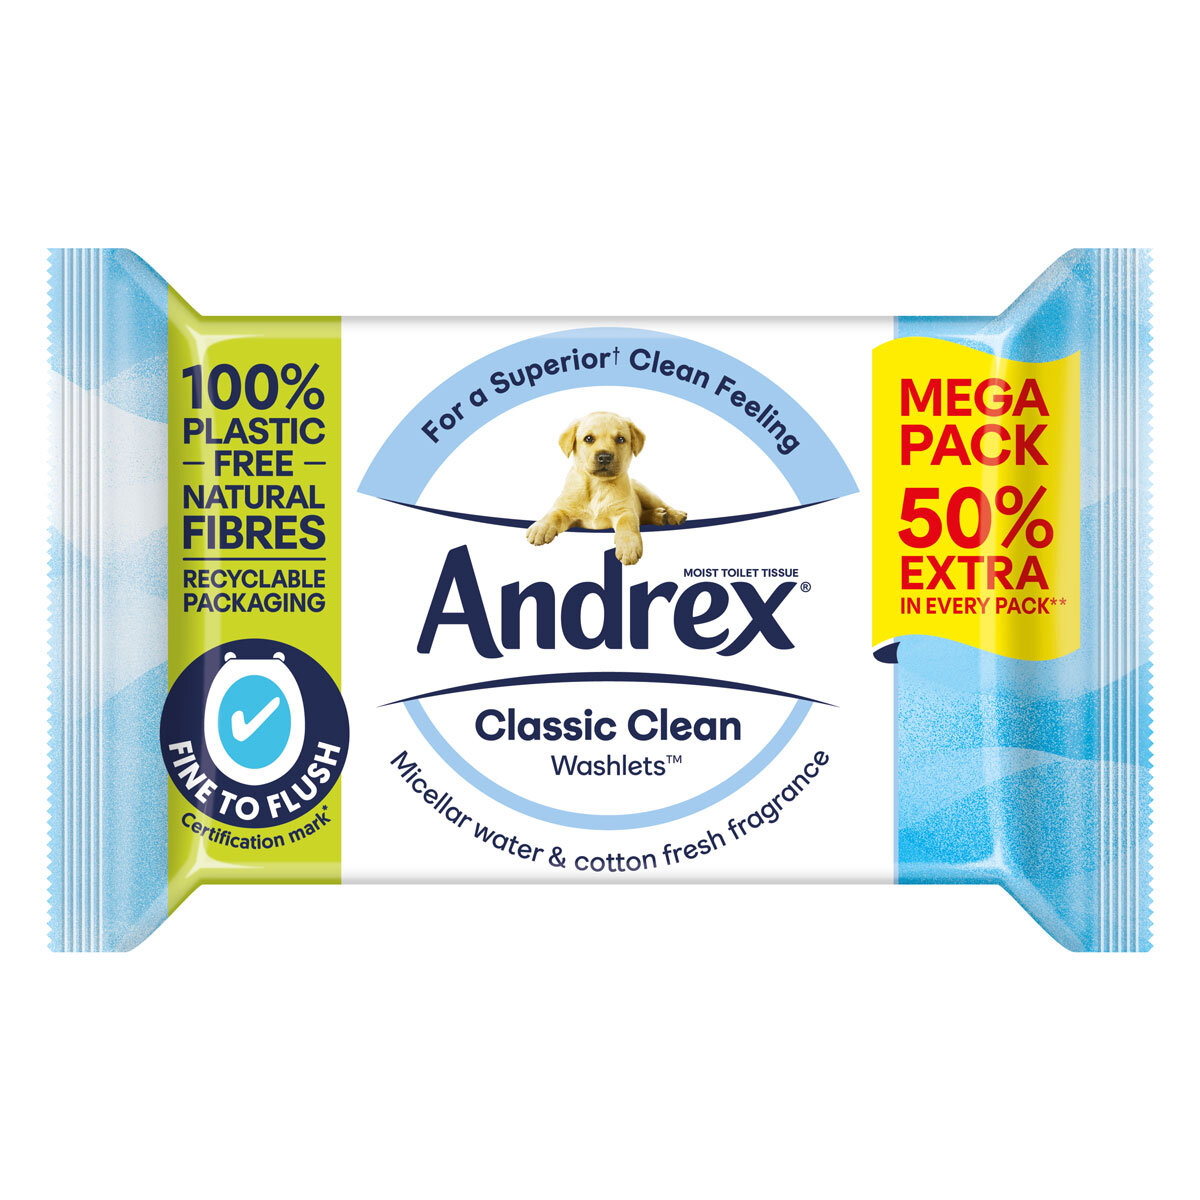 Andrex Classic Clean Washlets Wipes, 56 Pack